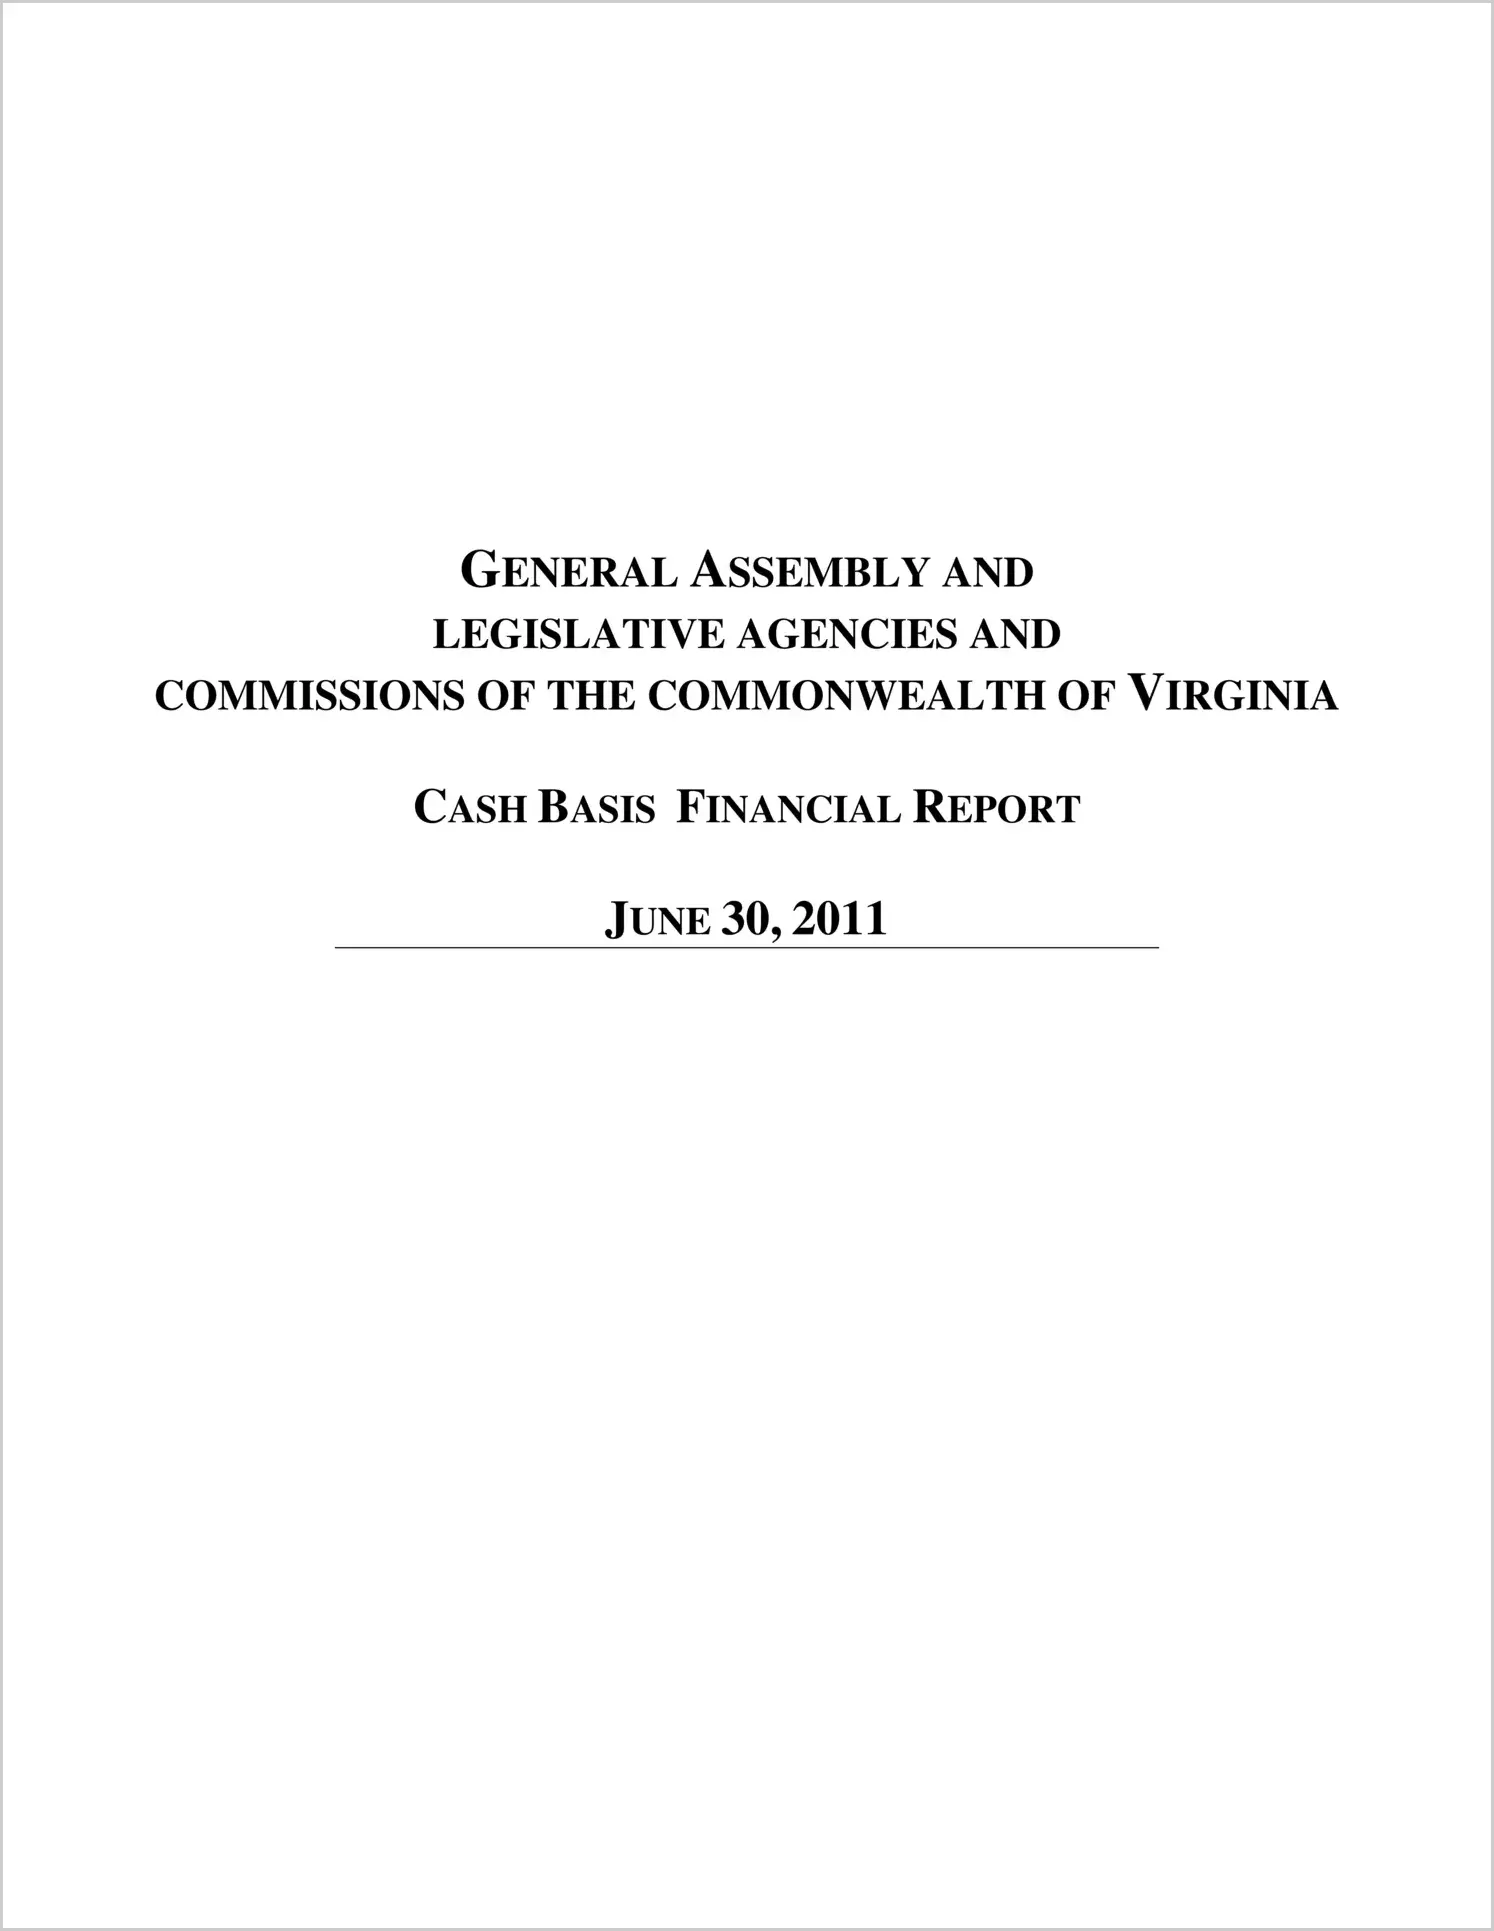 General Assembly and Legislative Agencies and Commissions of the Commonwealth of Virginia Financial Report For The Fiscal Year ended June 30, 2011